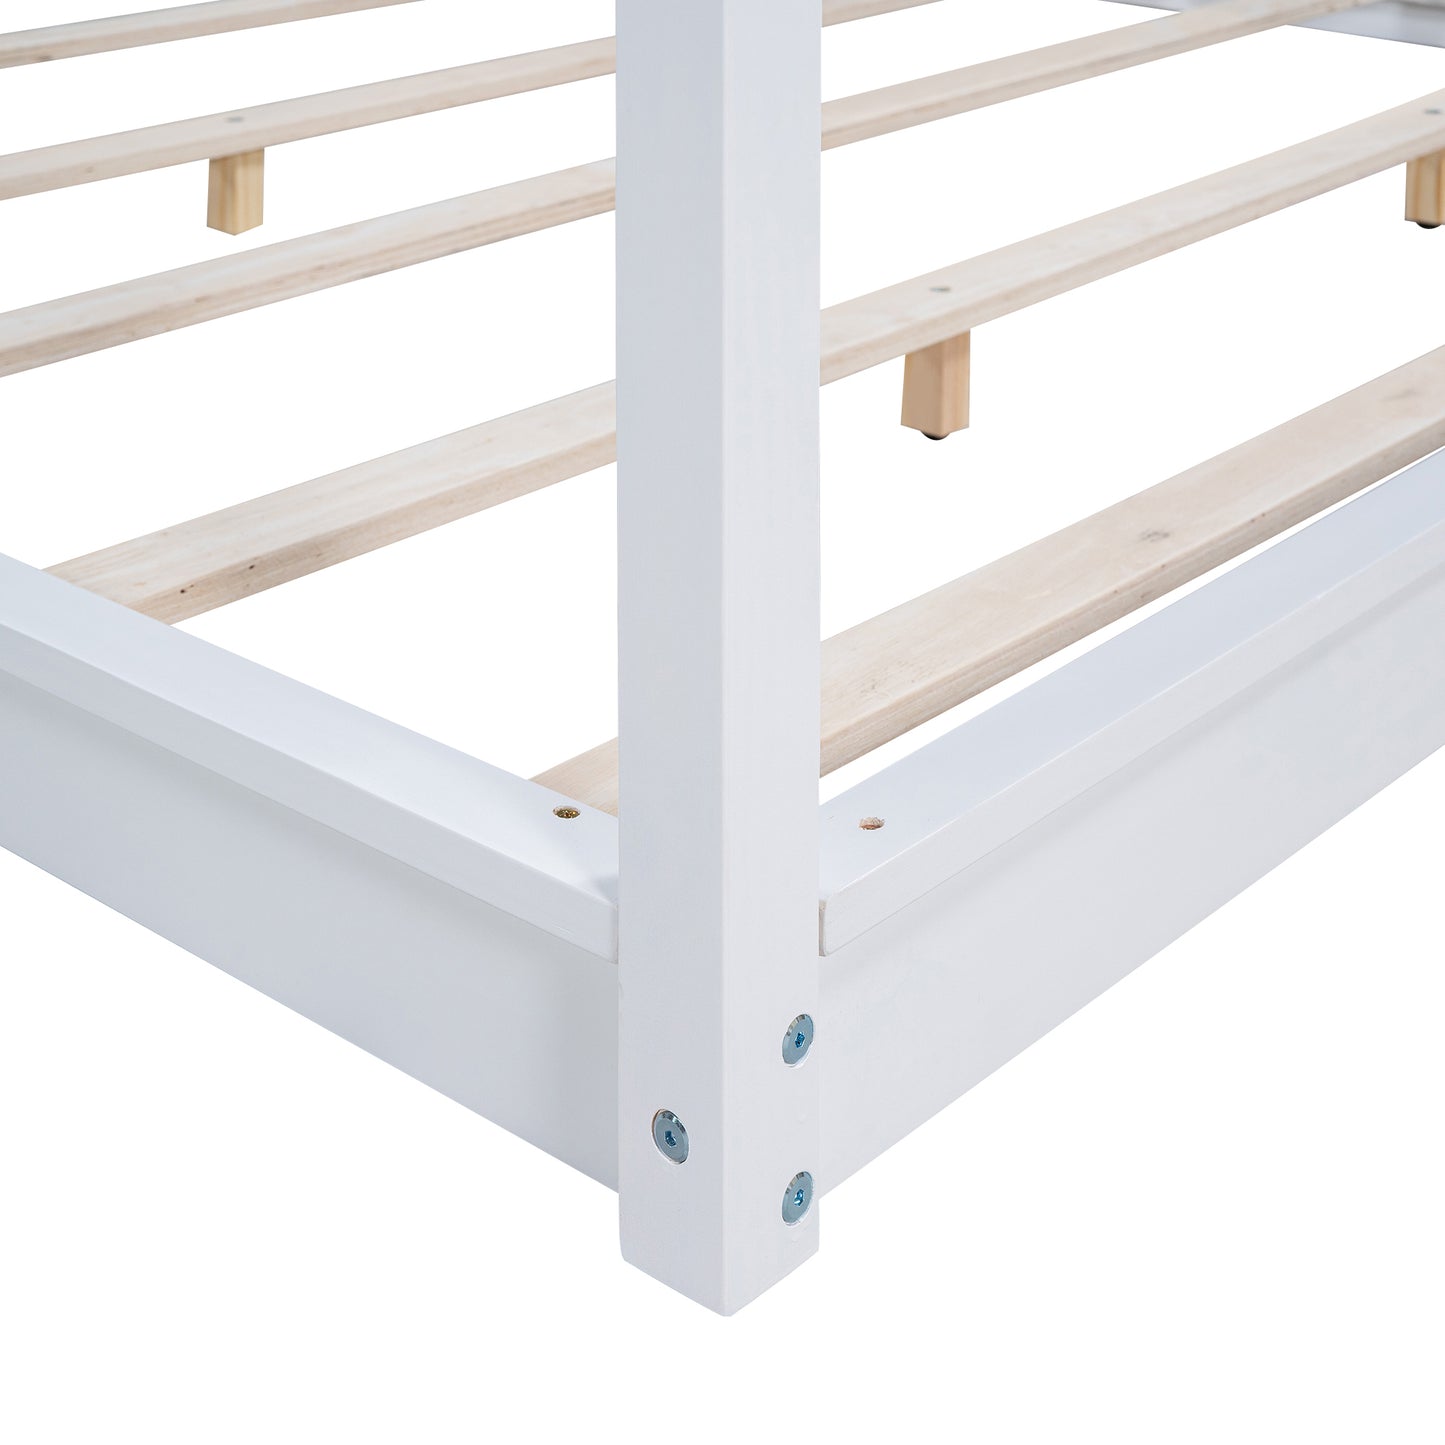 King Size Canopy Platform Bed with Support Legs,White